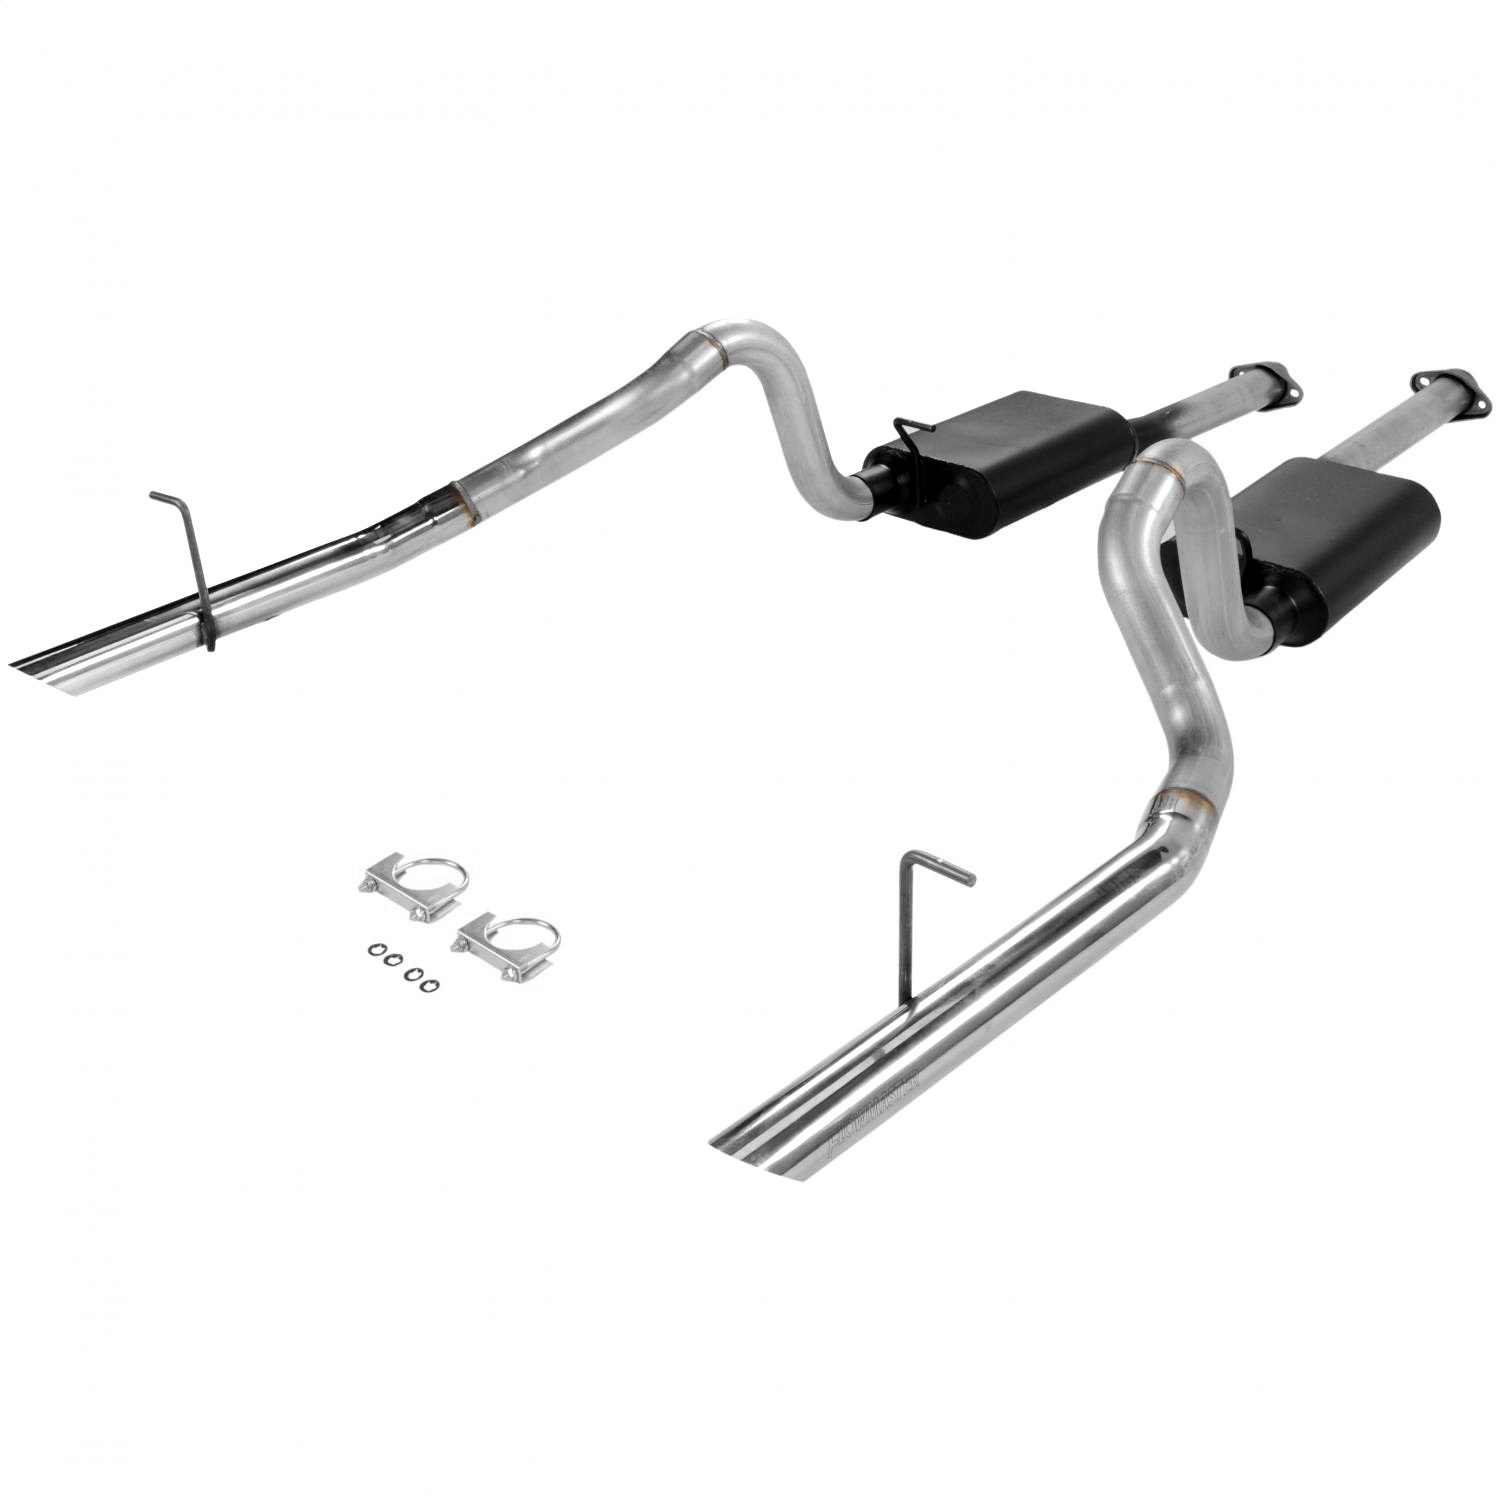 Flowmaster Flowmaster 17212 American Thunder Cat Back Exhaust System Fits 94-97 Mustang